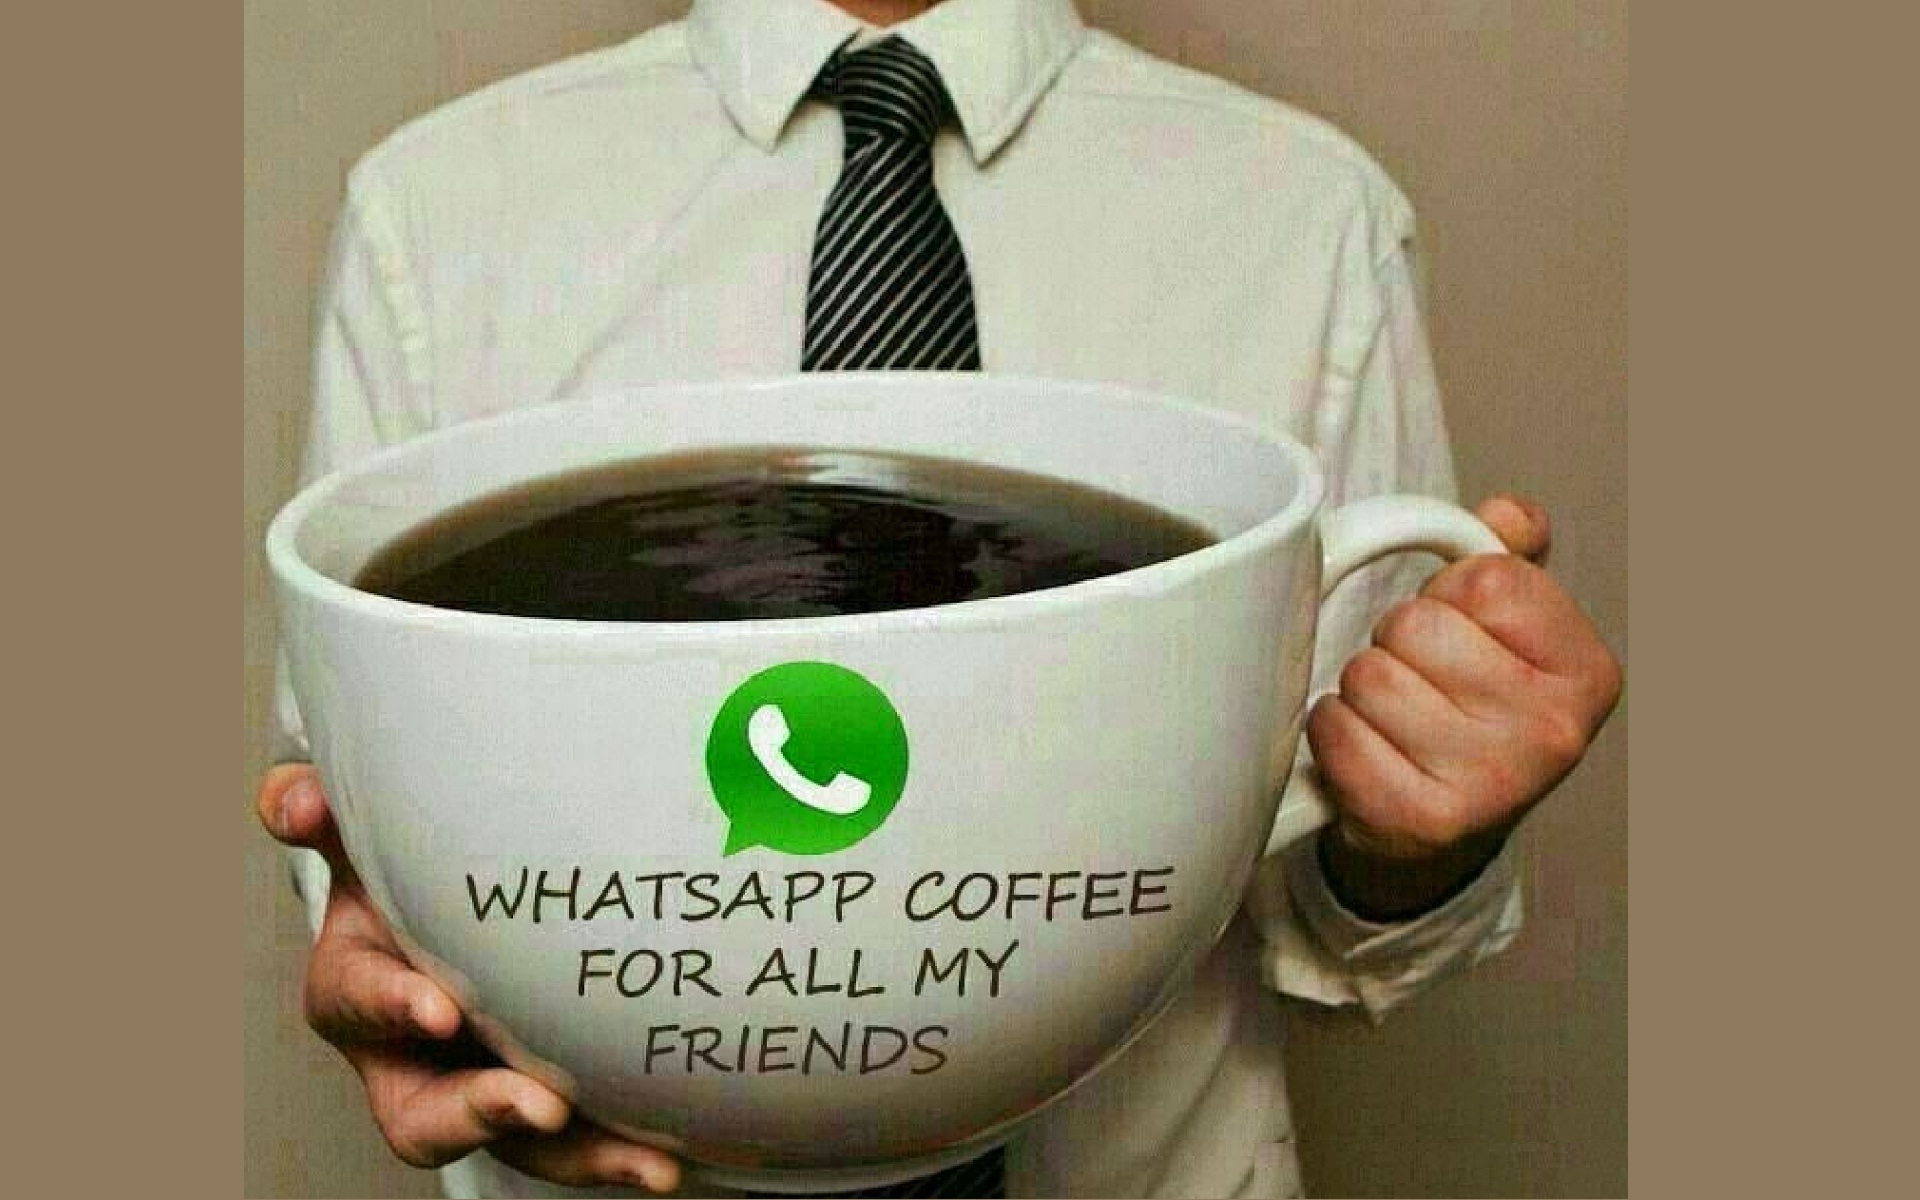 Whatsapp coffee for all friends funny morning HD Wallpapers Rocks